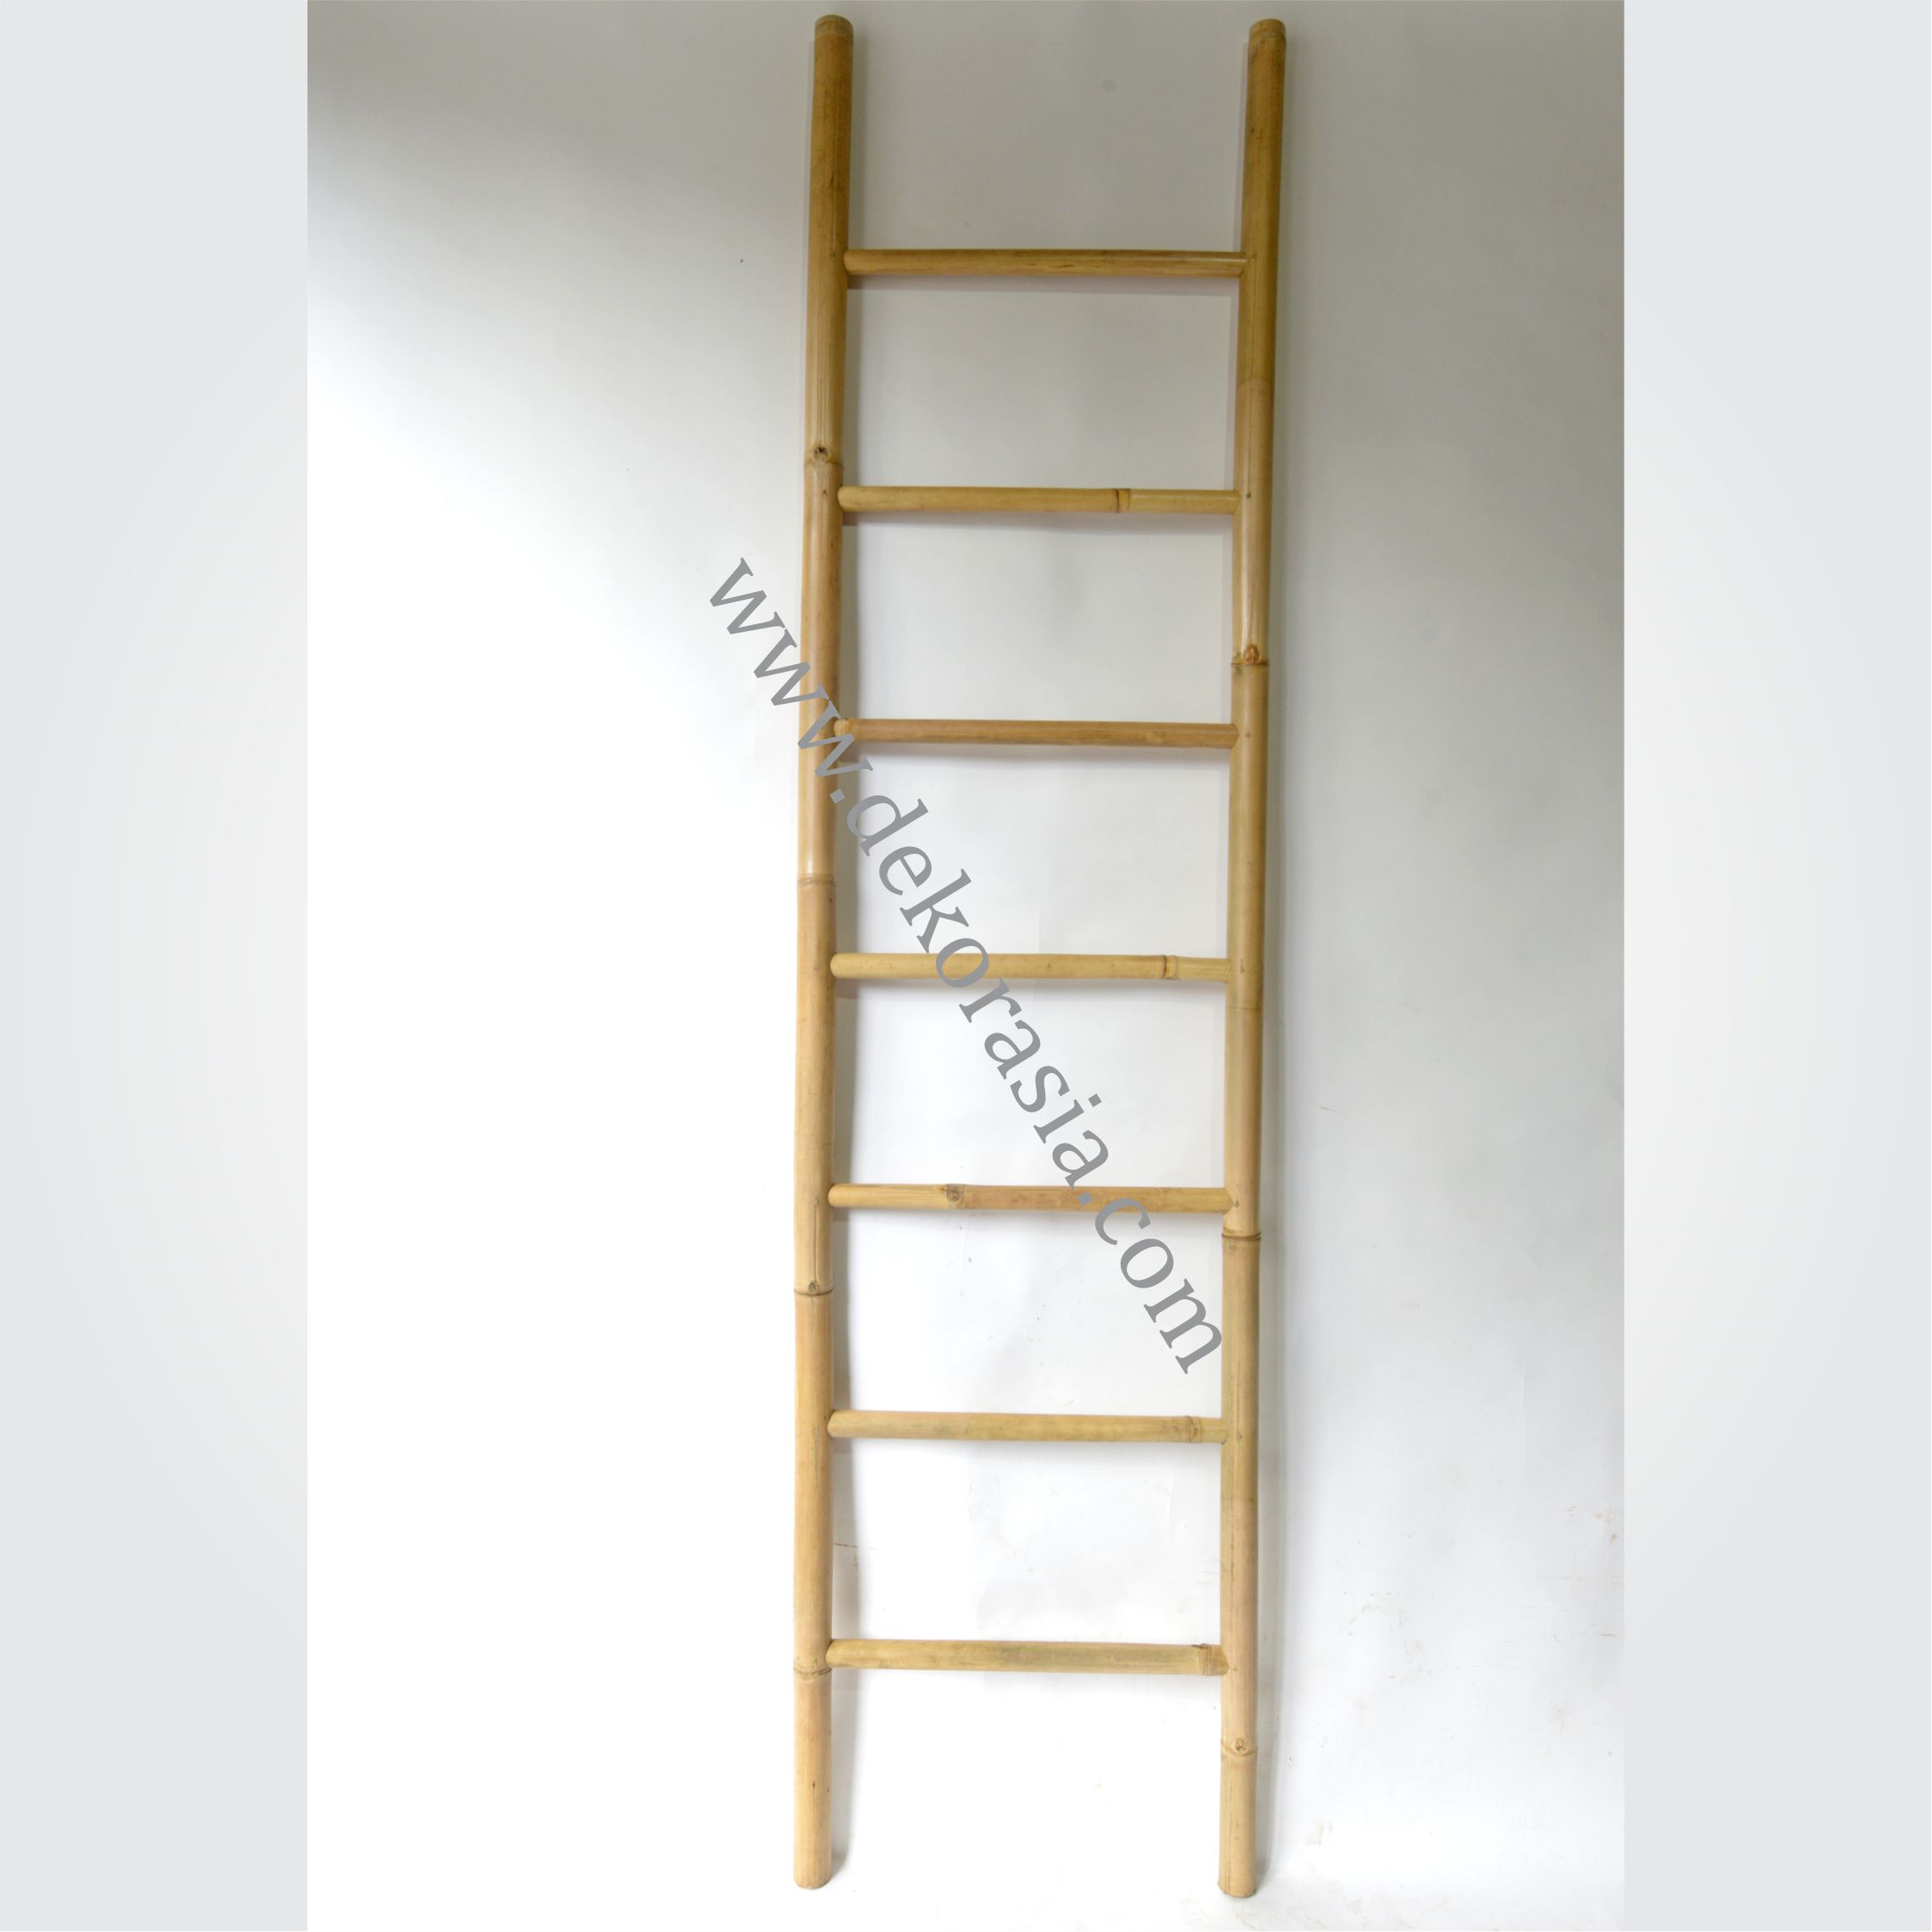 Bamboo Ladder Long Lasting Easy to Use Superb Design Lightweight Attractive Pattern, Bamboo Stand, Bamboo Ladders